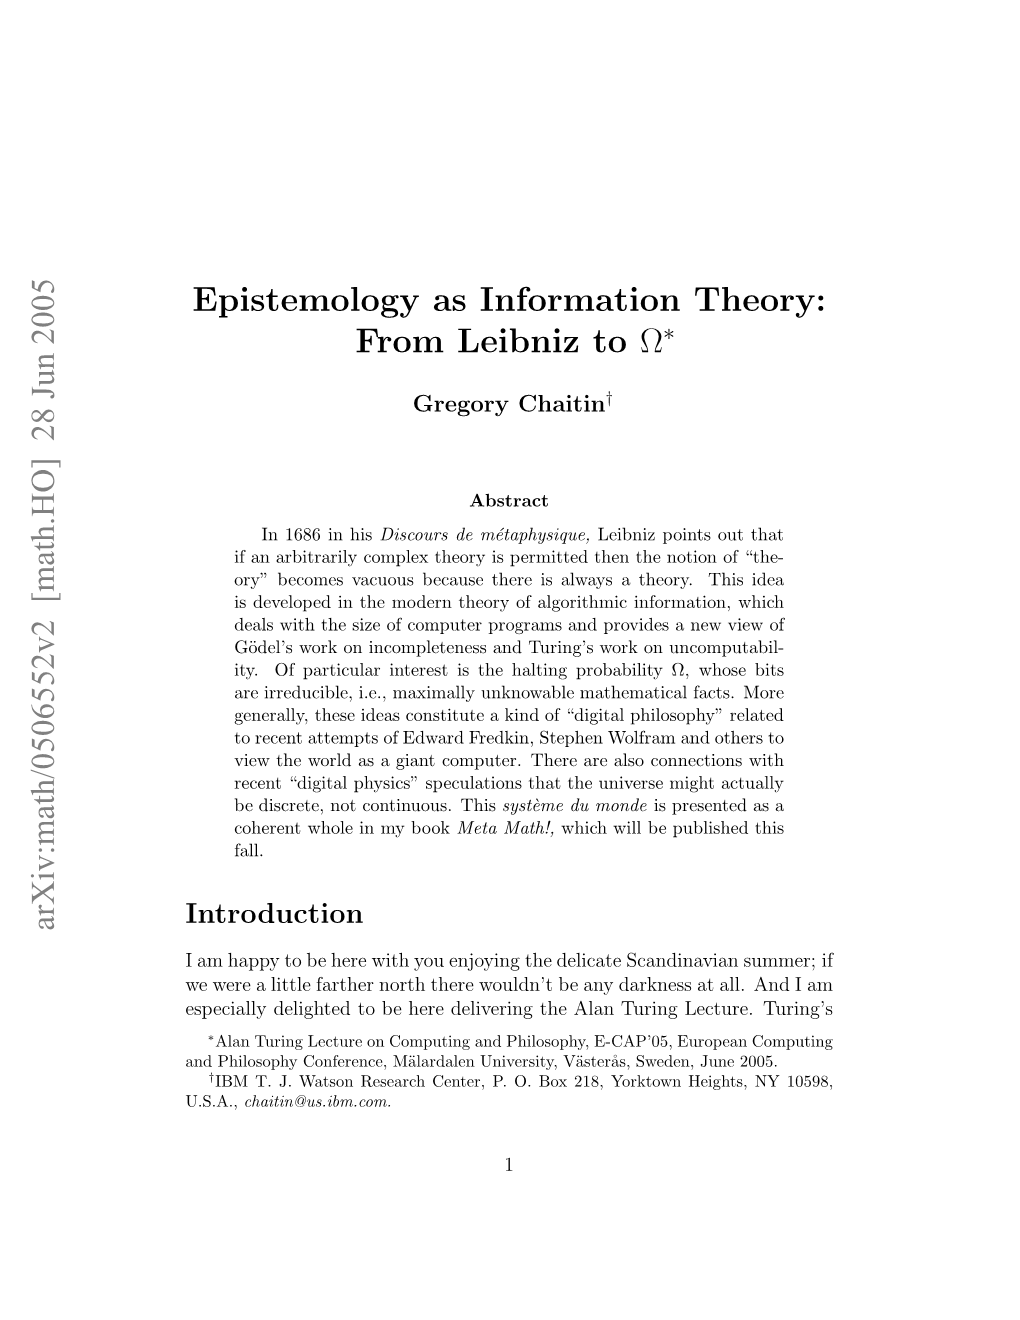 Epistemology As Information Theory: from Leibniz to Ω